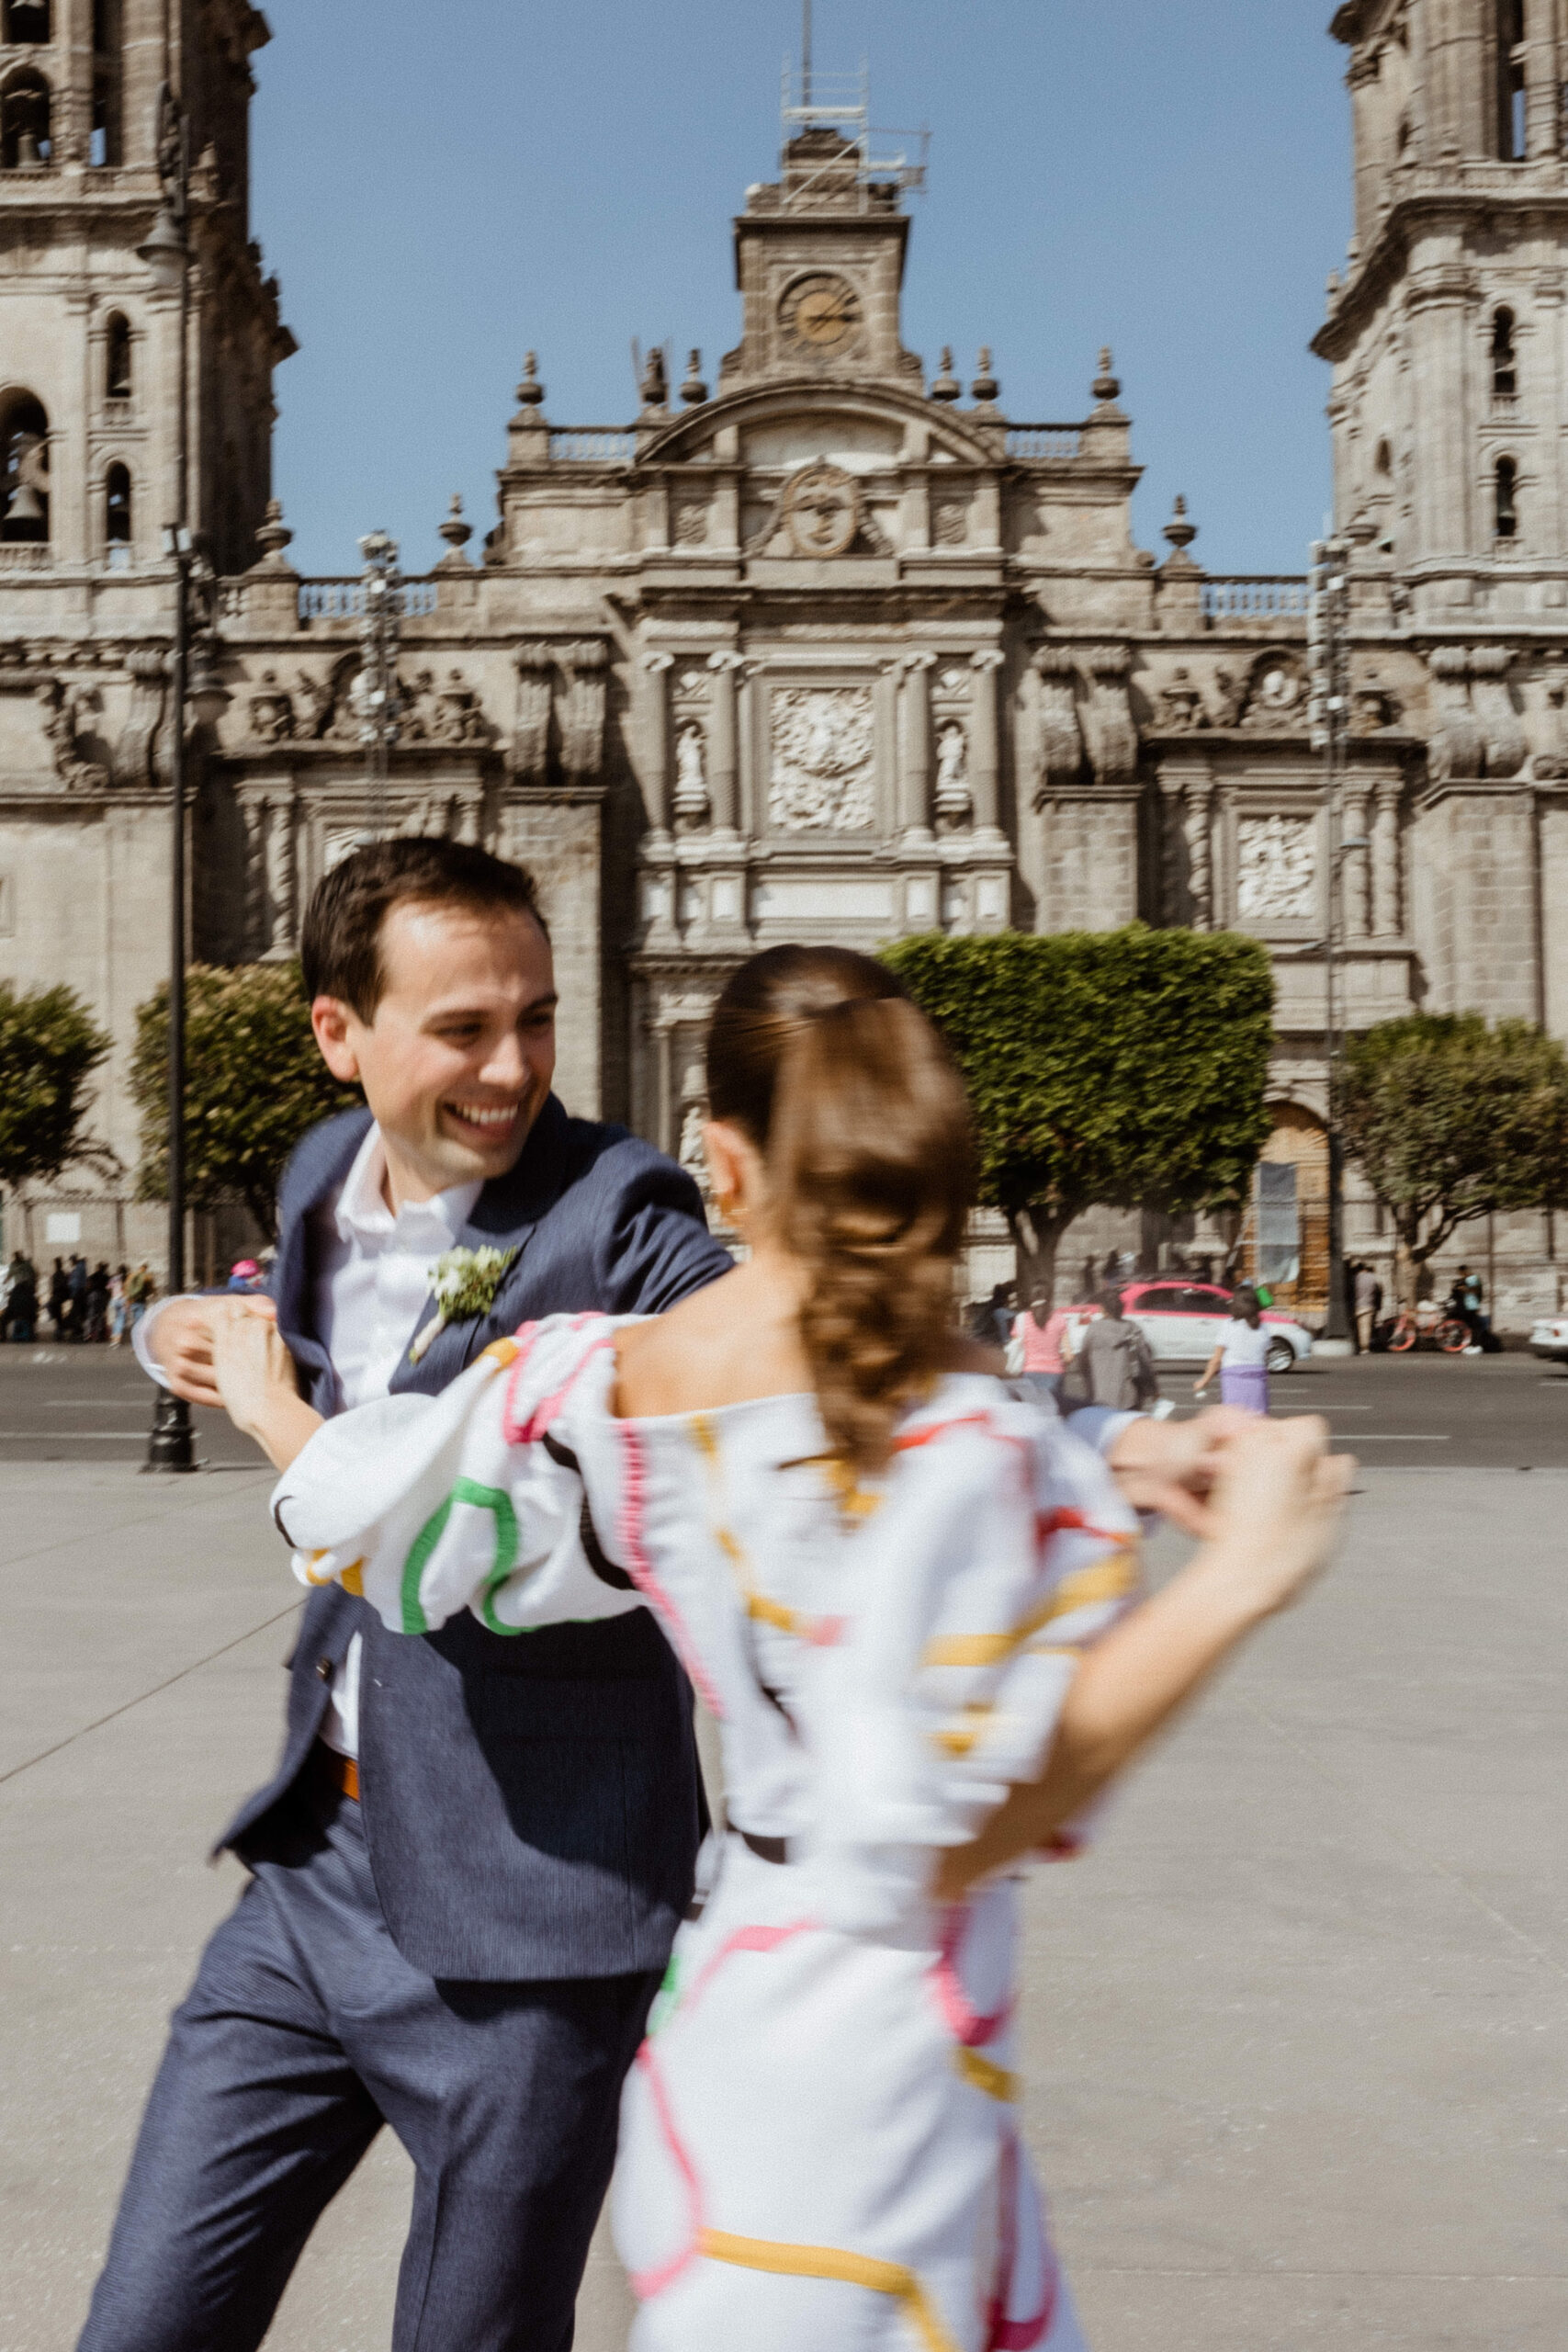 man and woman dancing in the streets of mexico city with mexico architecture in the background.